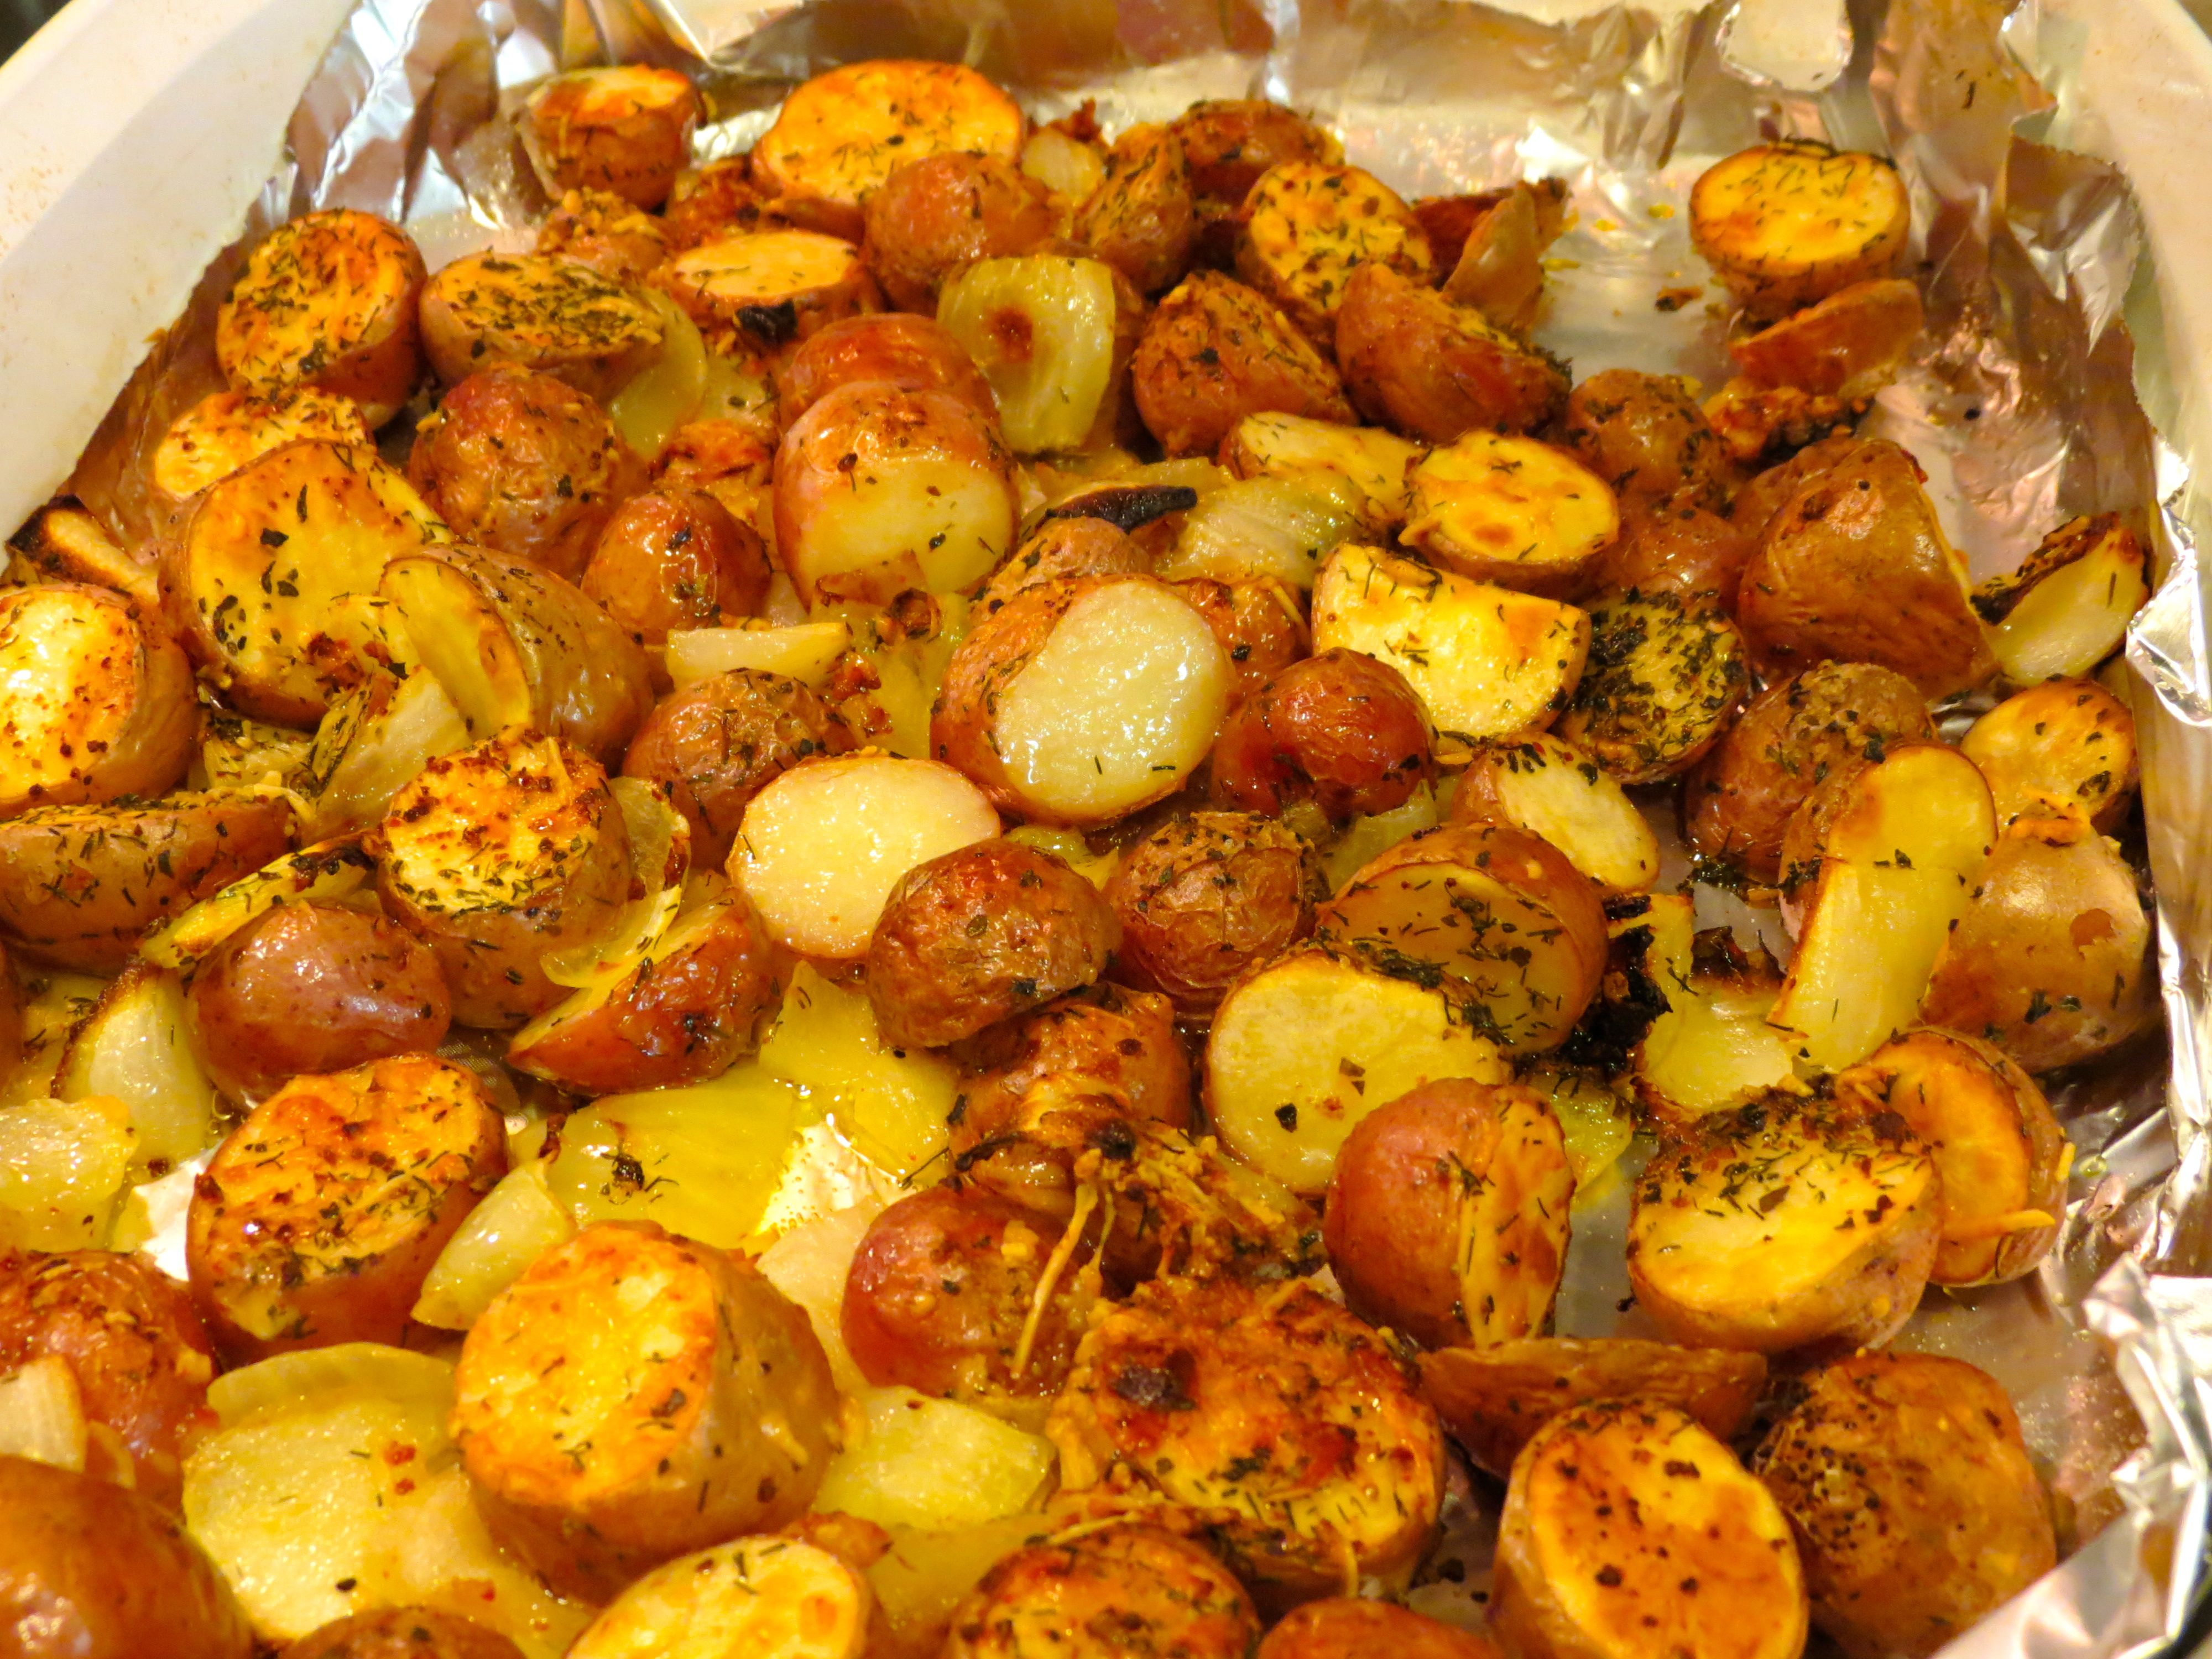 What are some easy recipes for roasted potatoes?